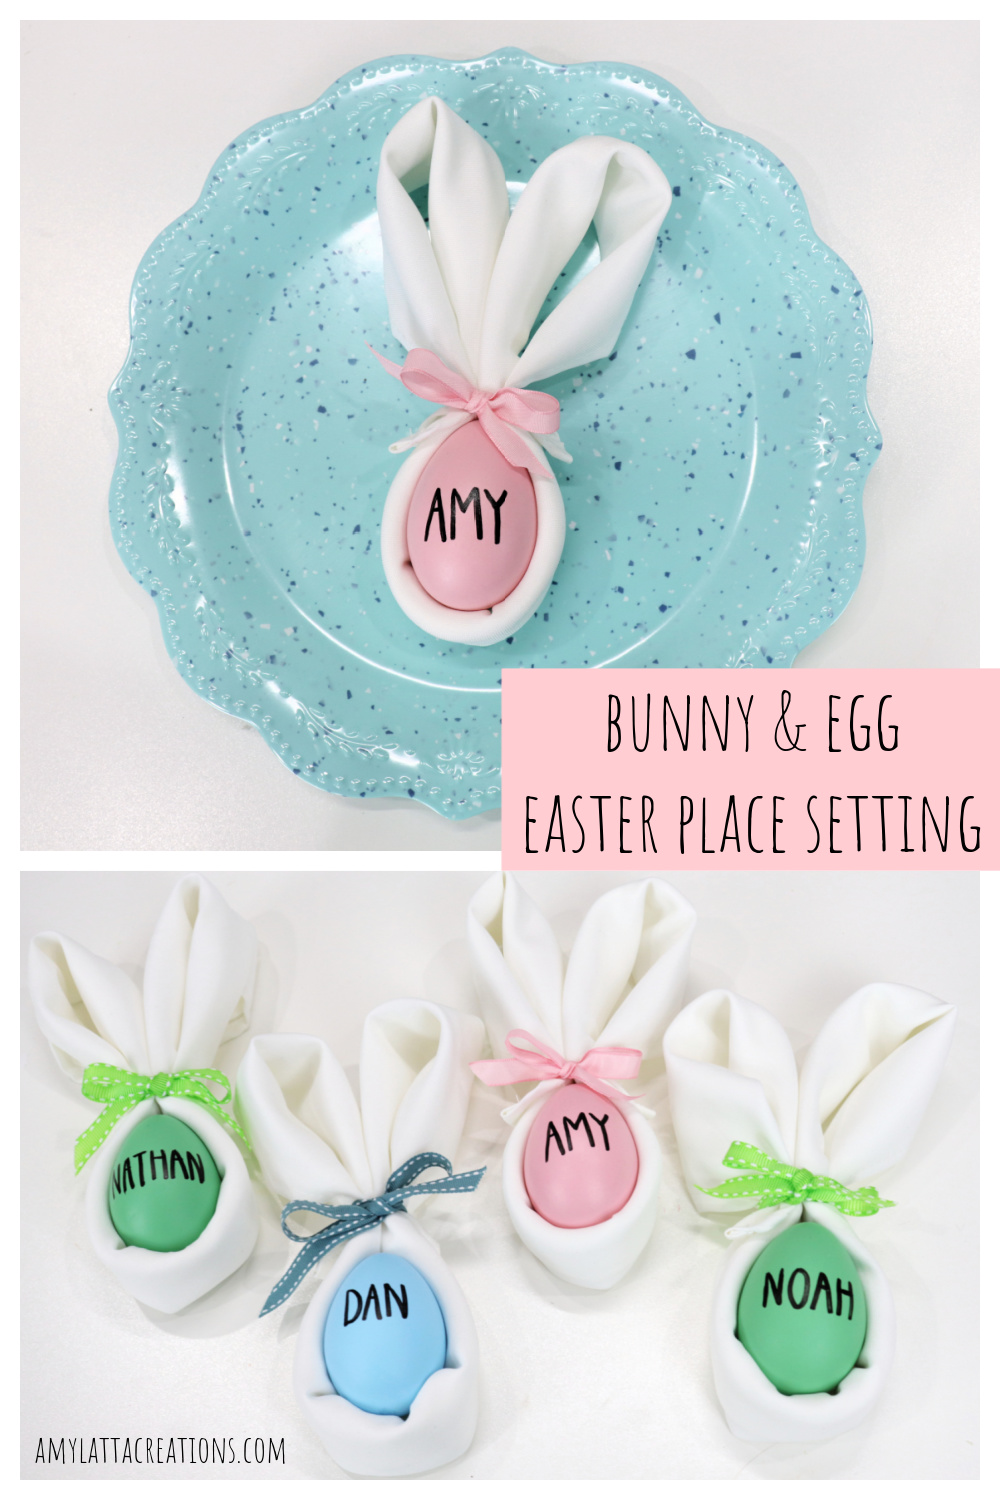 Image is a collage of bunny and egg place settings.